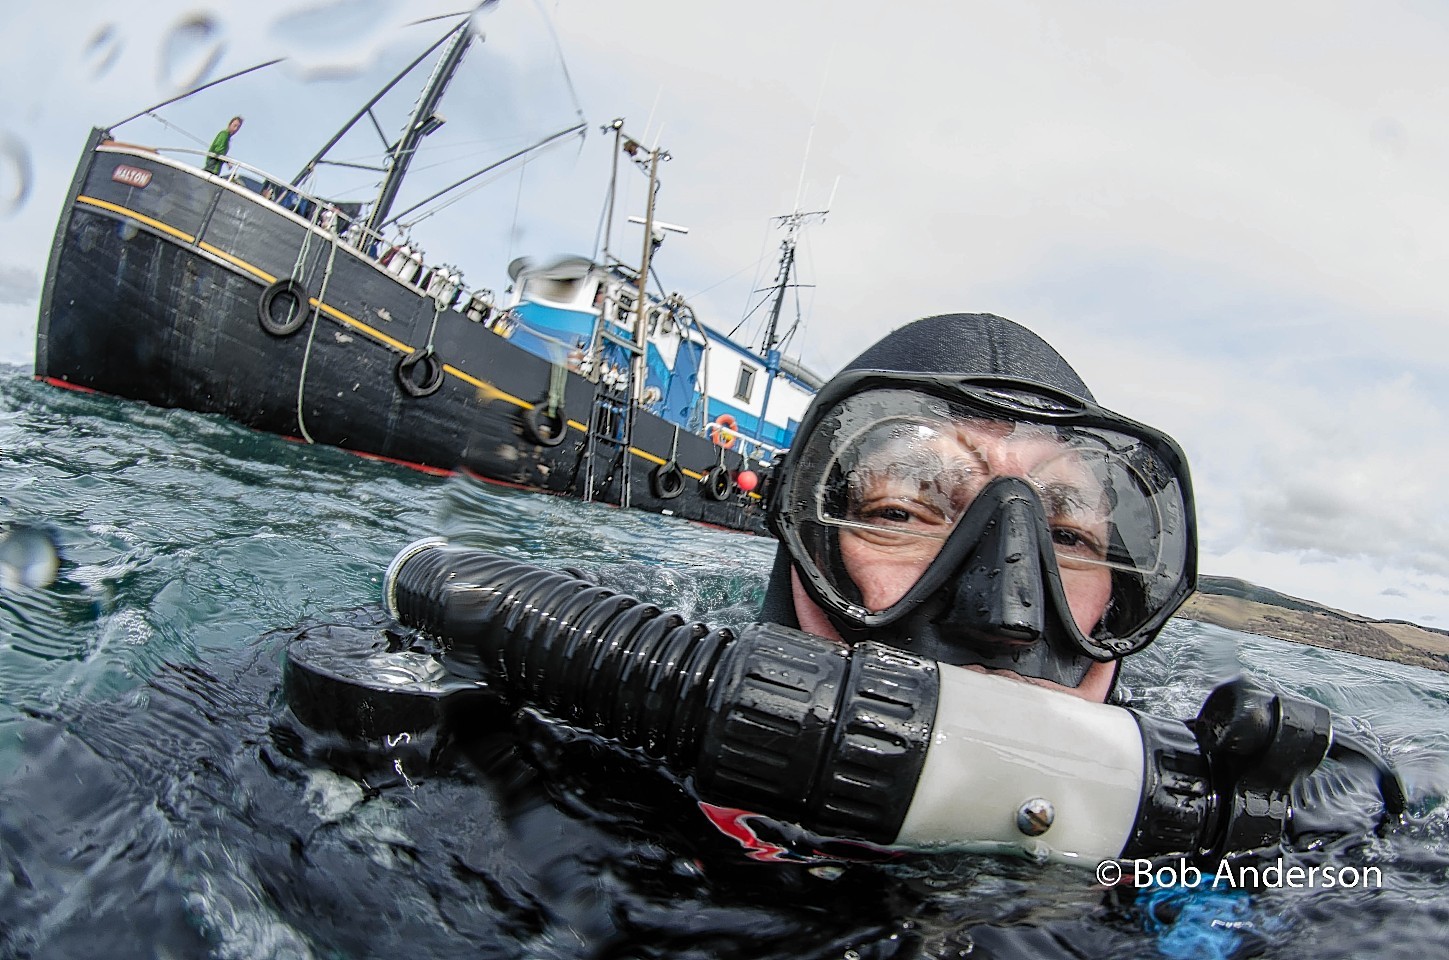 Scuba diver in Scapa Flow, preparing to map shipwrecks on sea bed.